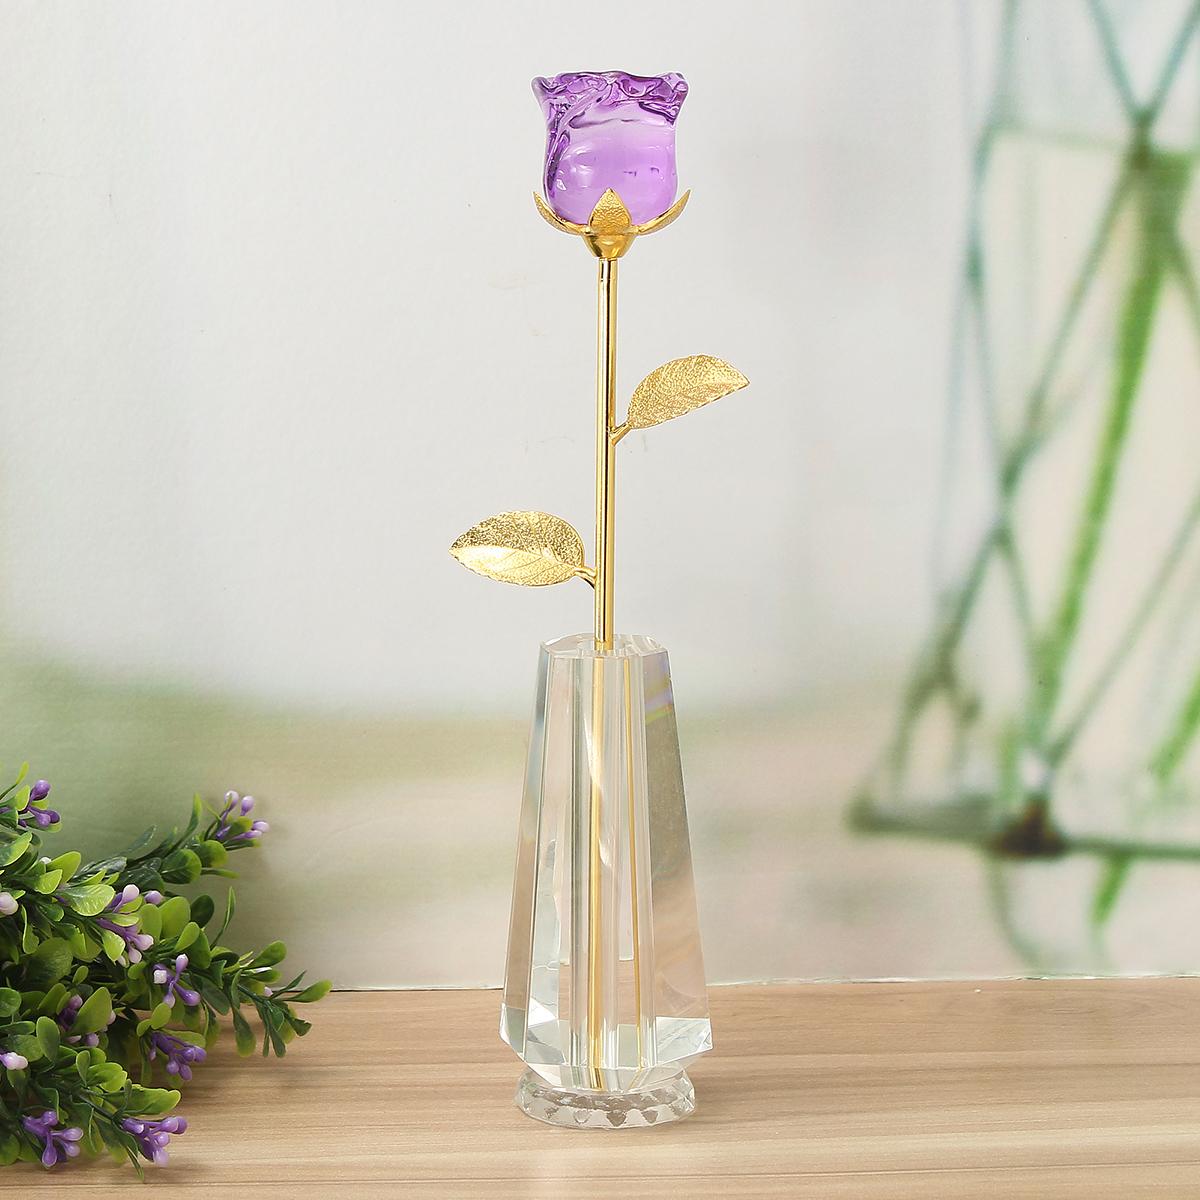 Crystal-Glass-Golden-Roses-Flower-Ornament-Valentine-Gifts-Present-with-Box-Home-Decorations-1430314-5